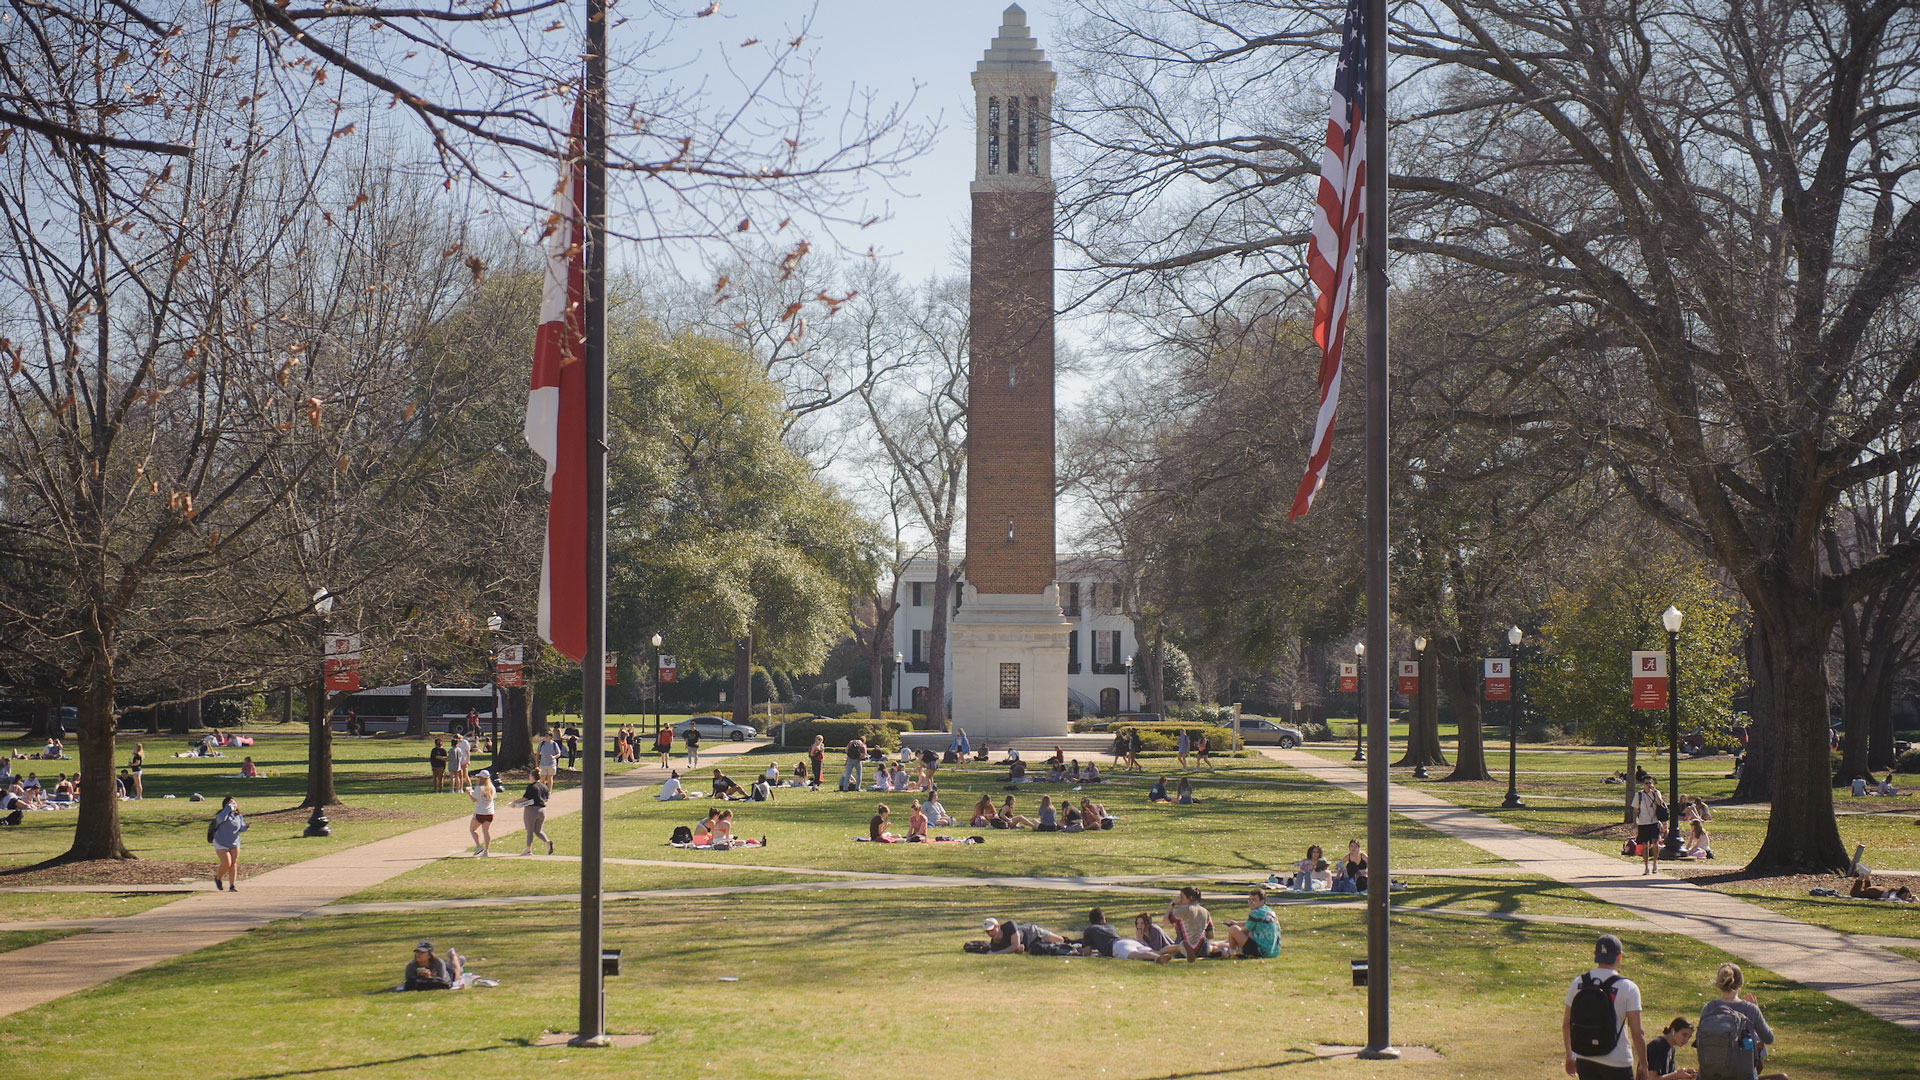 Photograph from the view of the steps of Gorgas Library looking out over the Quad full of groups of students sitting in the grass